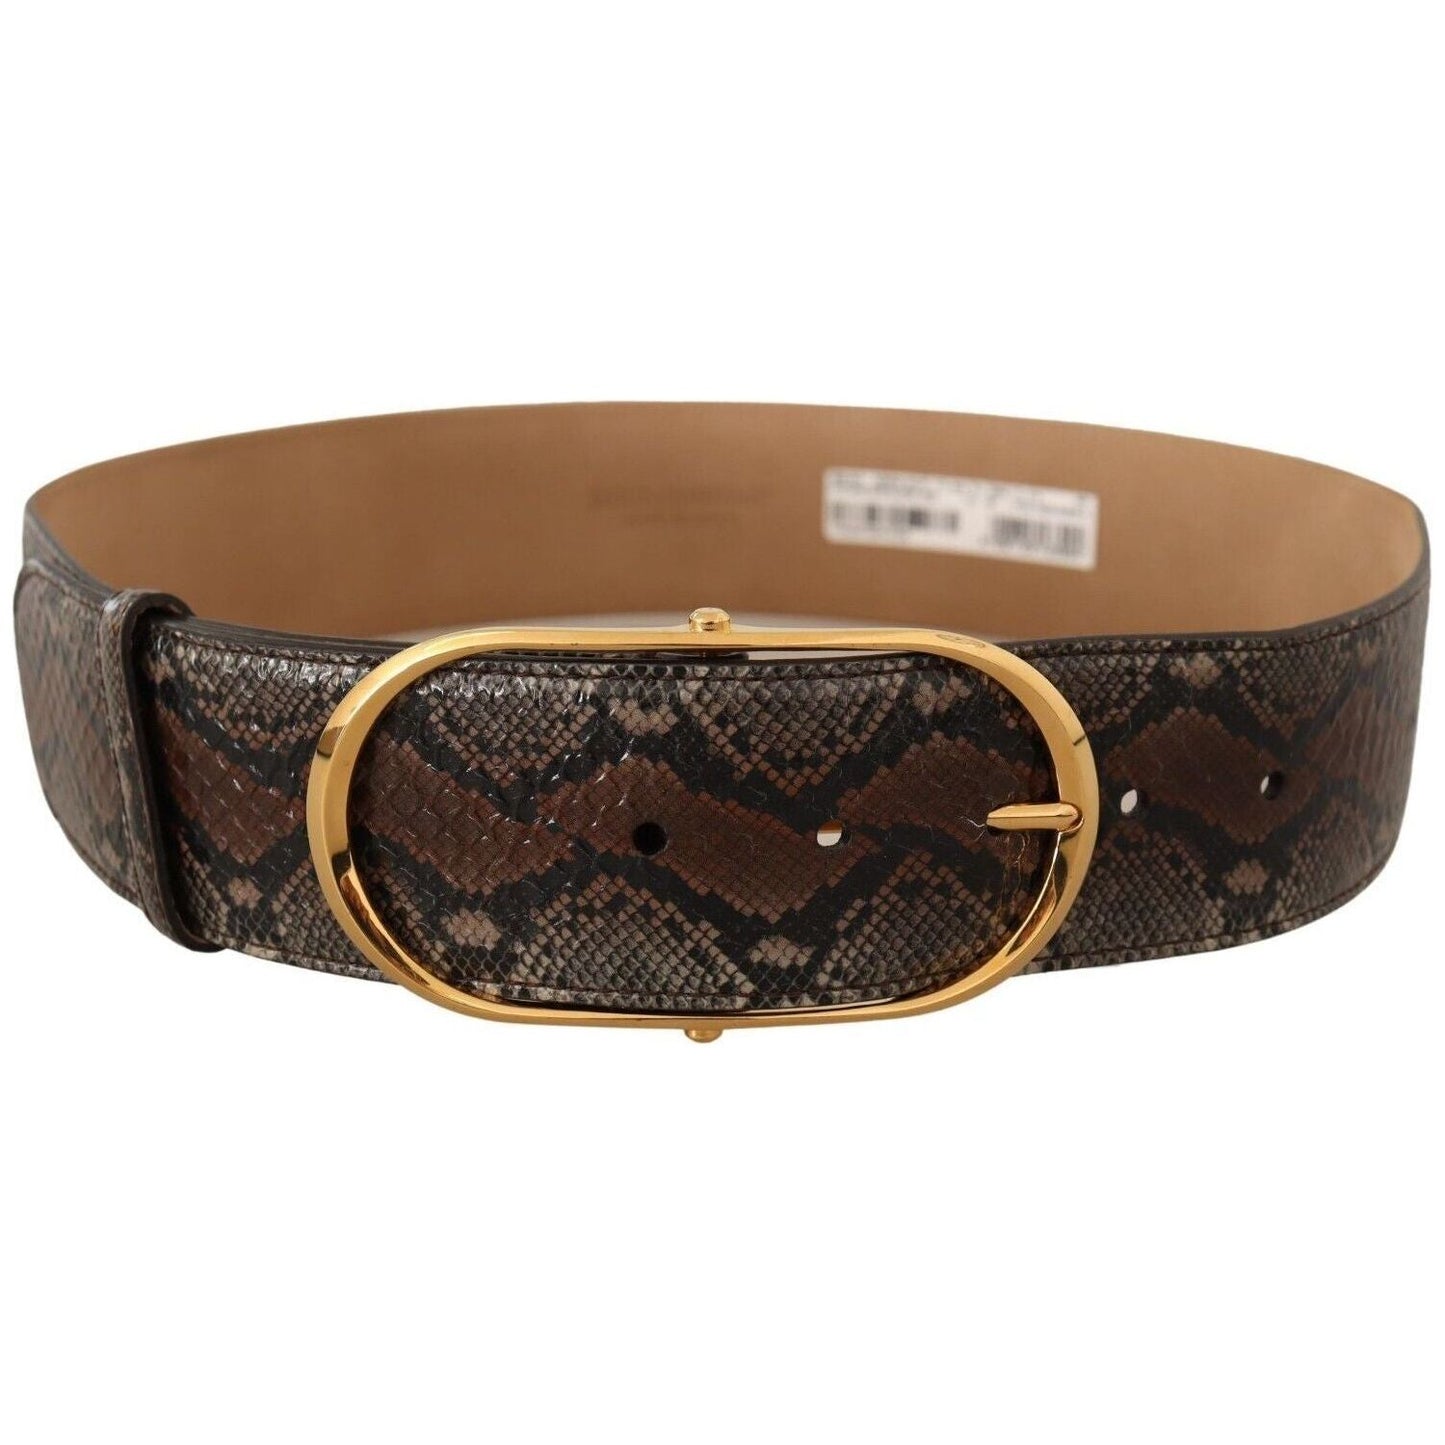 Dolce & Gabbana Elegant Brown Leather Belt with Gold Buckle brown-exotic-leather-gold-oval-buckle-belt-5 WOMAN BELTS s-l1600-282-c2e0bab2-b3c.jpg